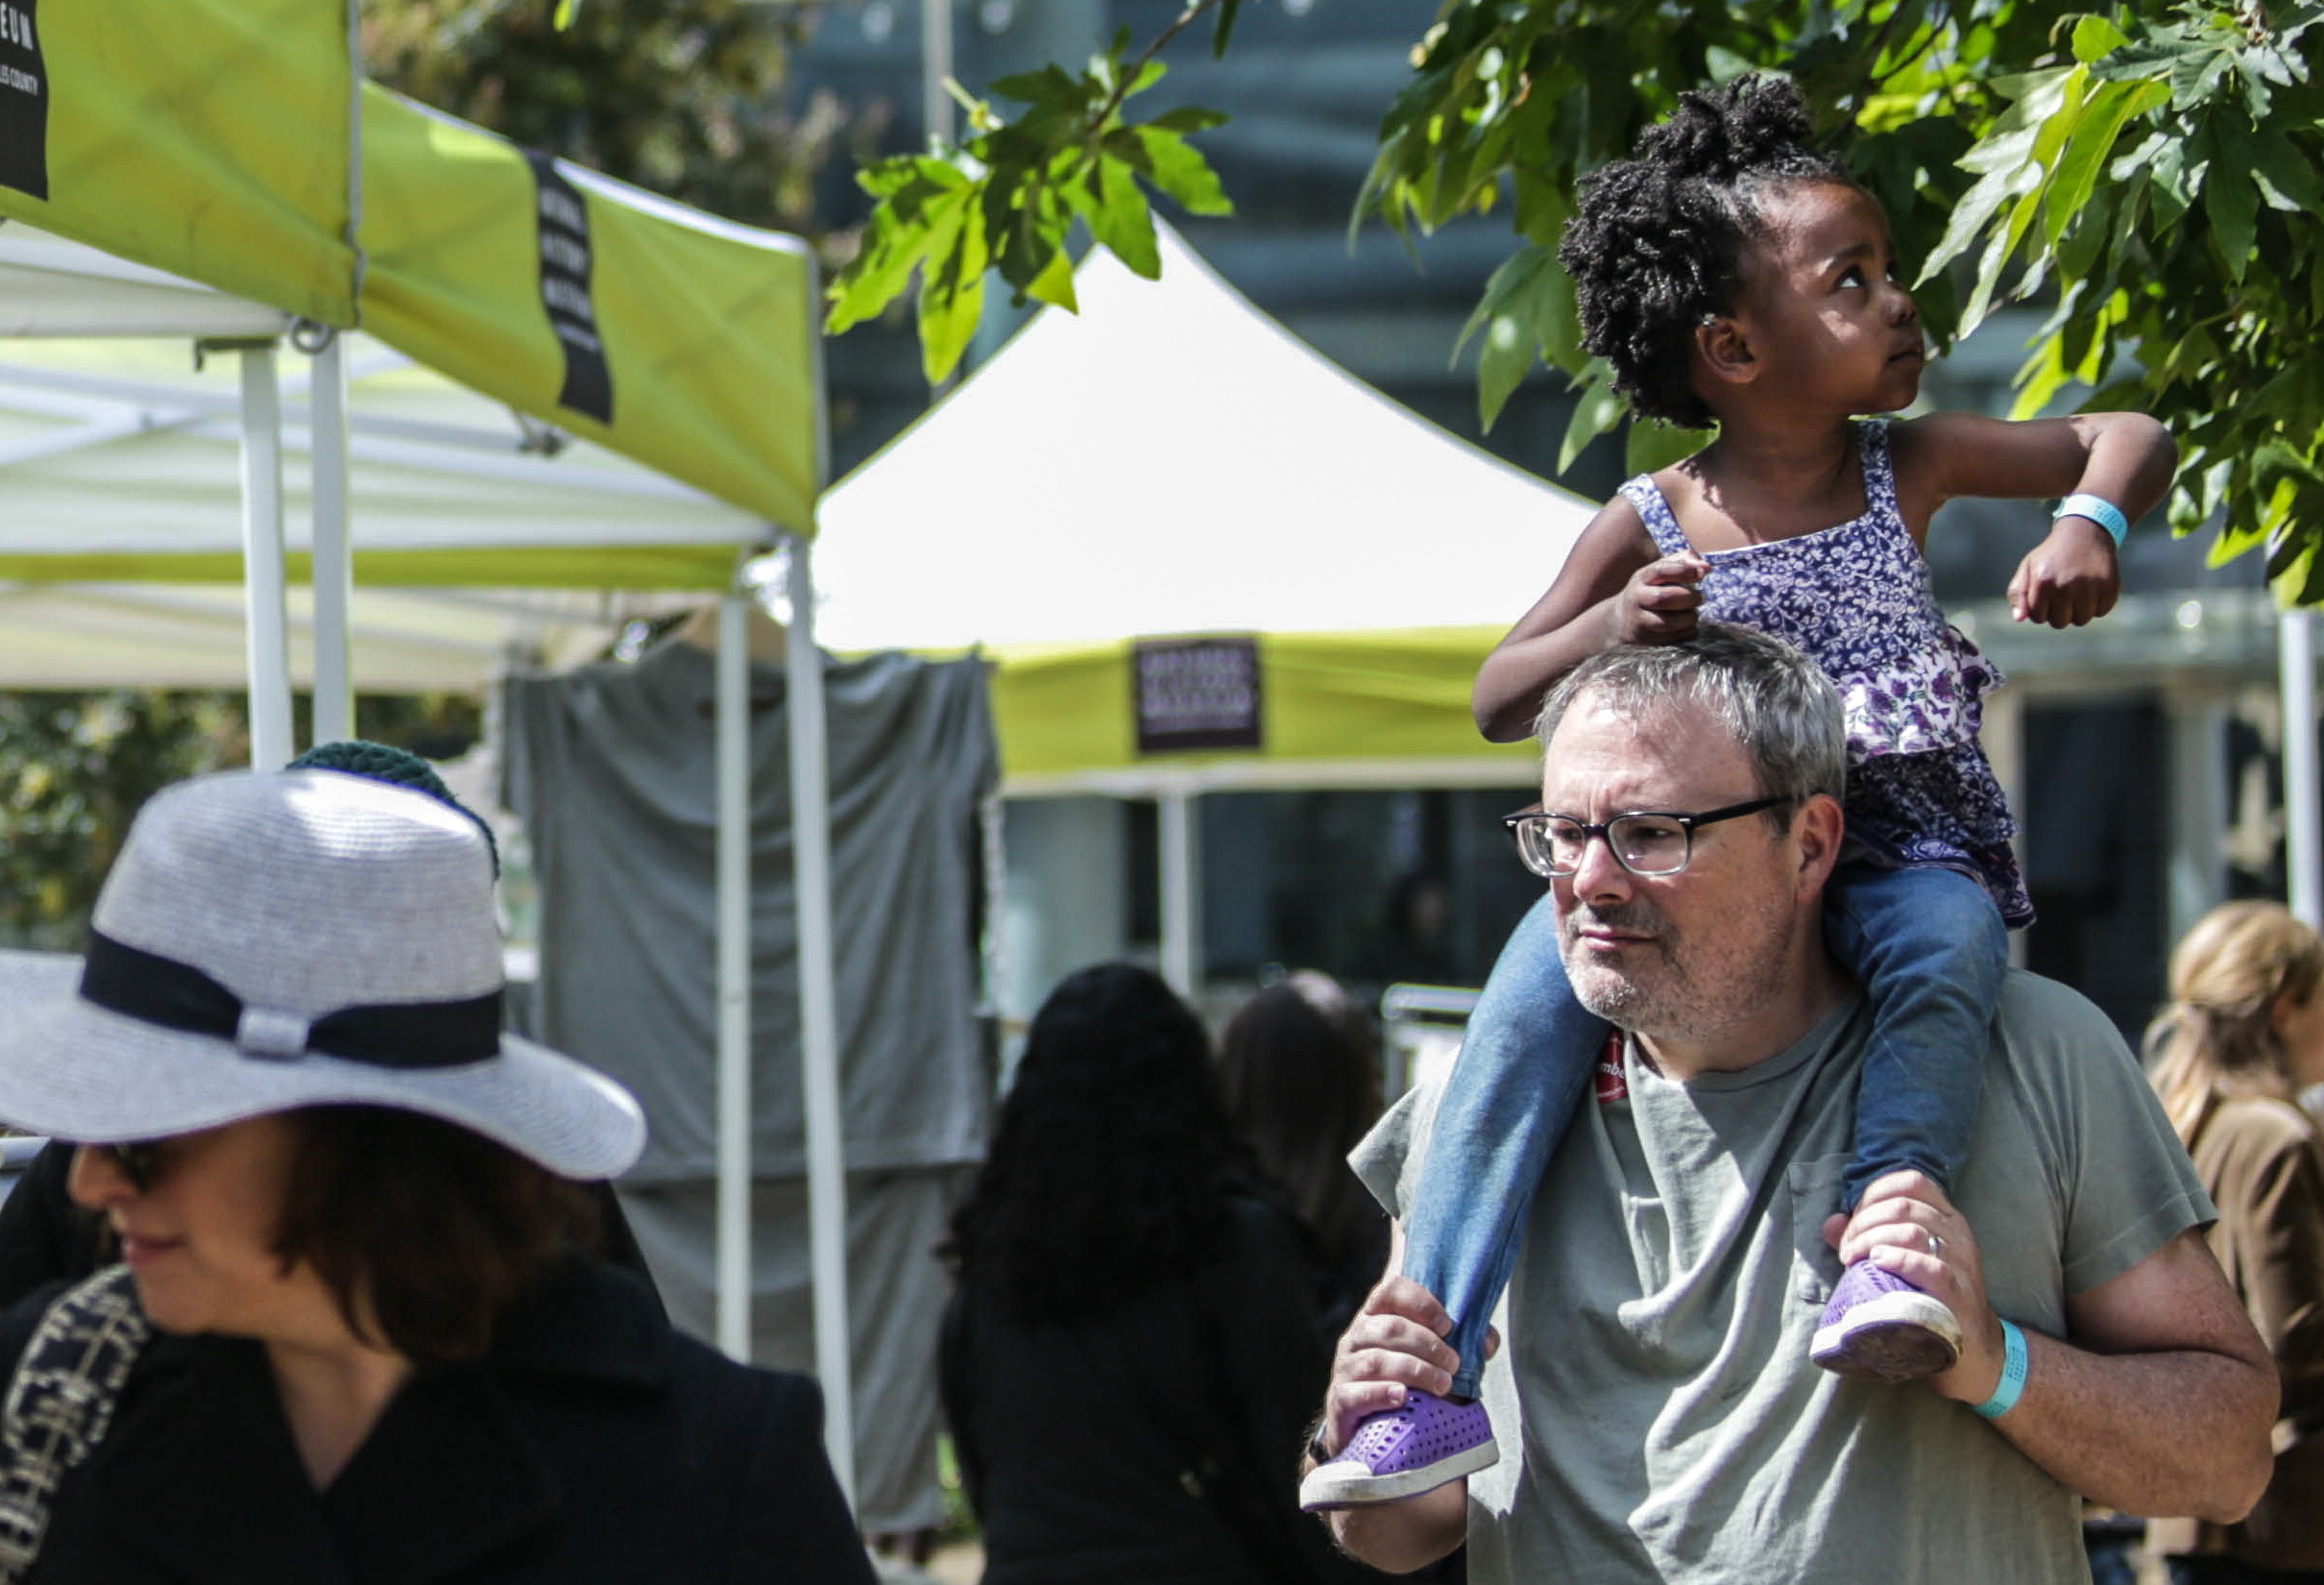  Families and children gathered at the National History Museum at the University of Southern California, Los Angeles, California to participate in the Los Angeles Natrure Fest. Events took place on Saturday, March 17, 2018. (Corsair Photo/ William We